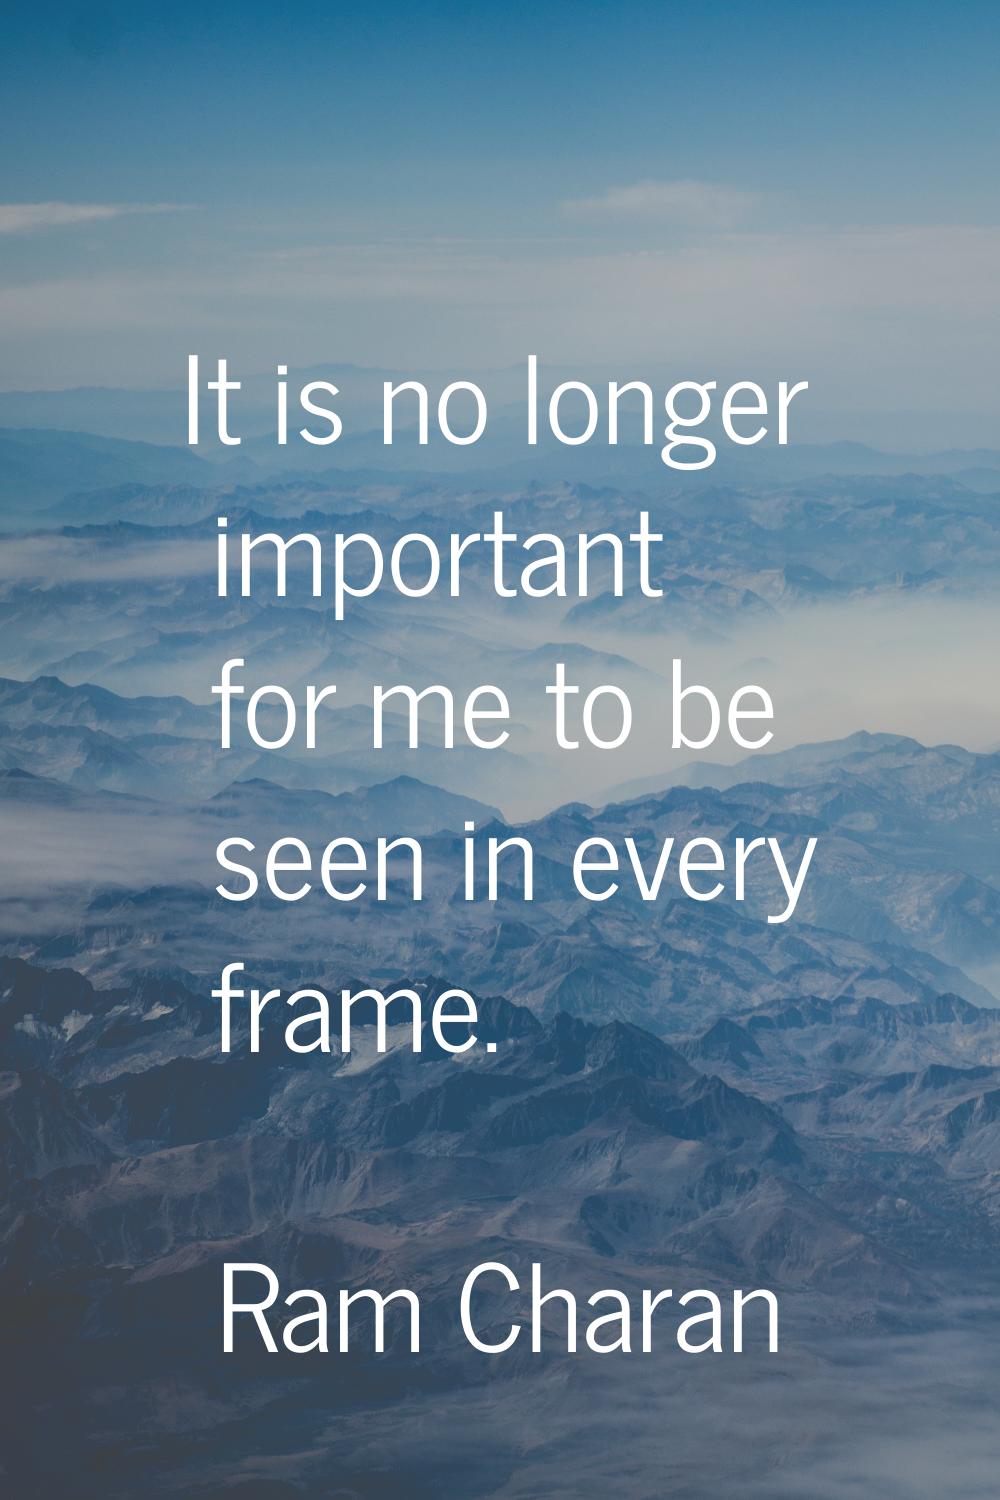 It is no longer important for me to be seen in every frame.